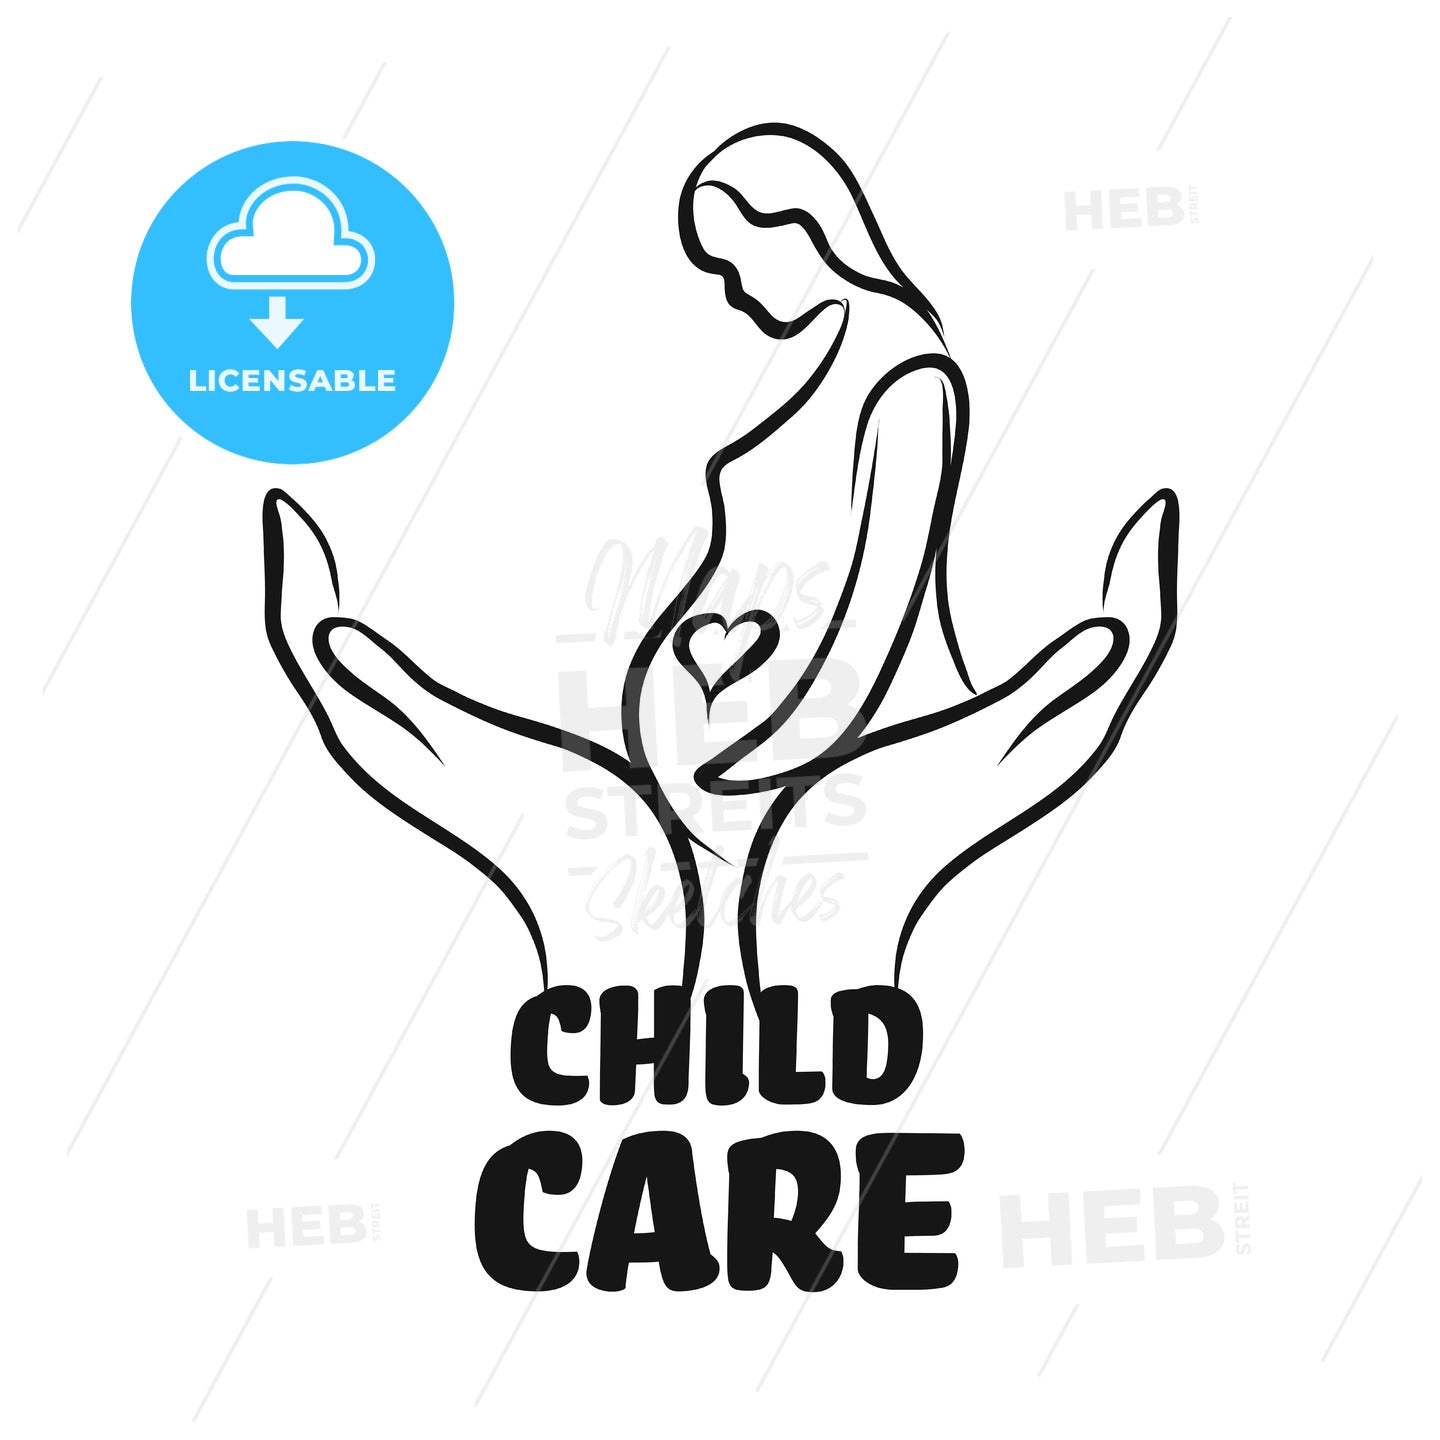 Child care icon with hands – instant download